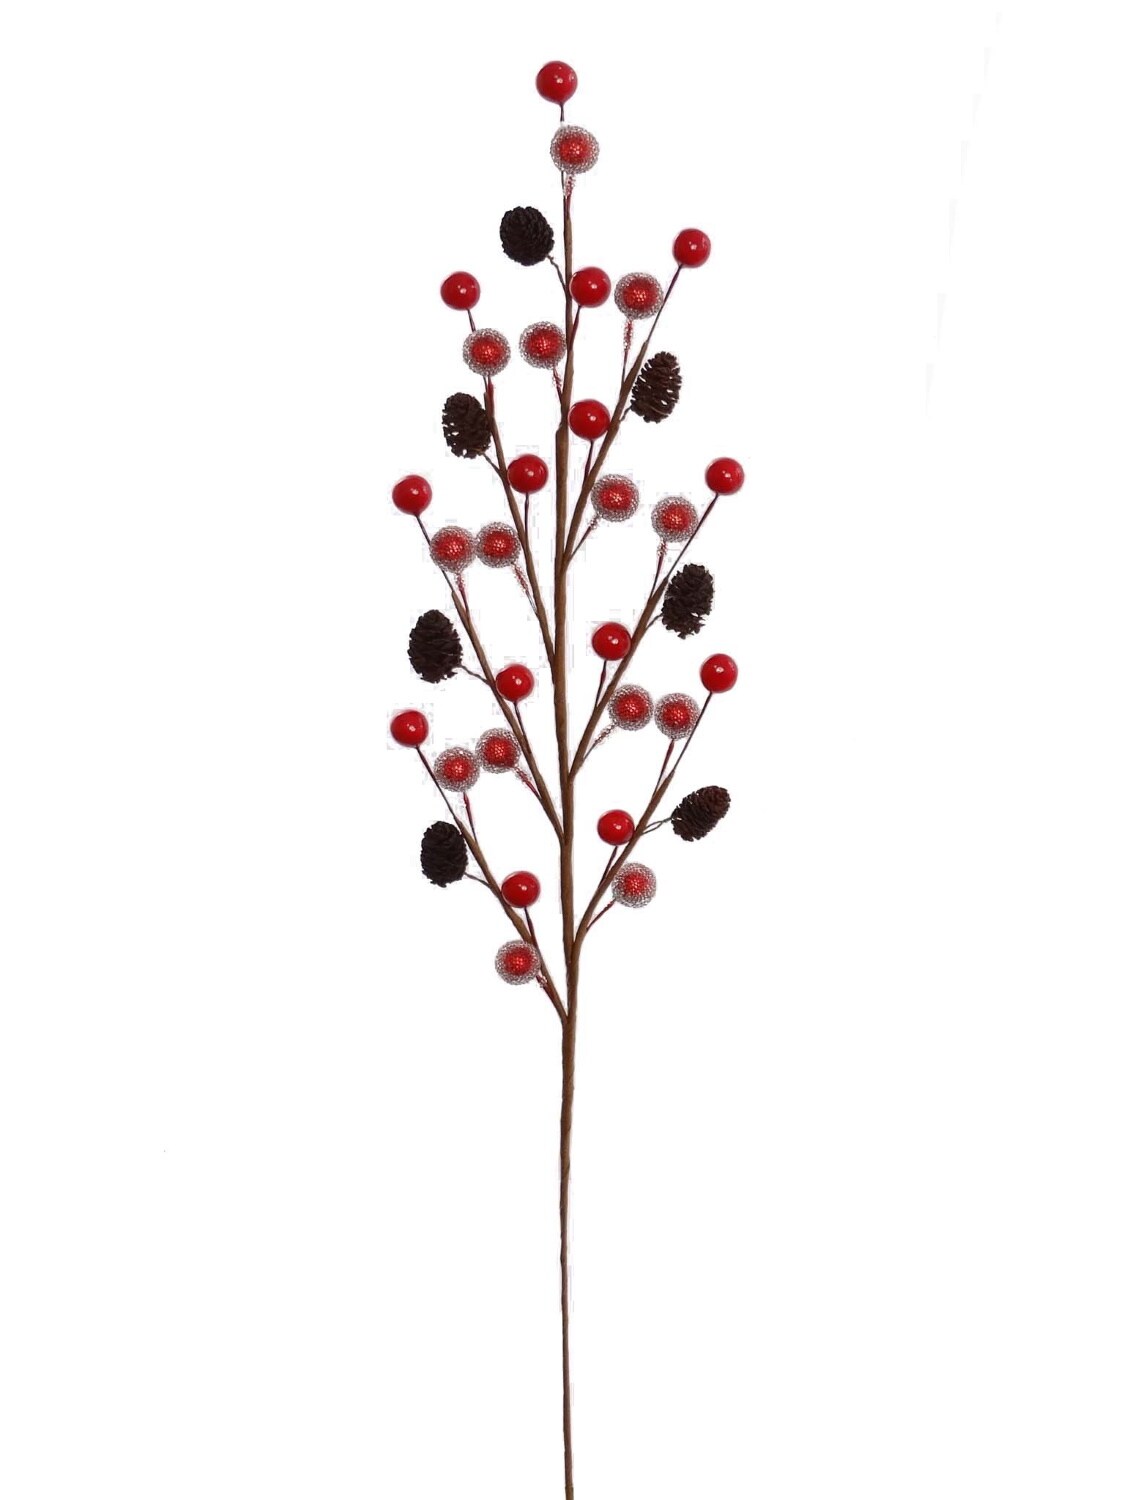 Box of 36: 17&#x22; Red Berry Stems with Mini Brown Pine Cones - Festive Holiday D&#xE9;cor for Trees, Wreaths, Garlands, Christmas Picks, Home &#x26; Office